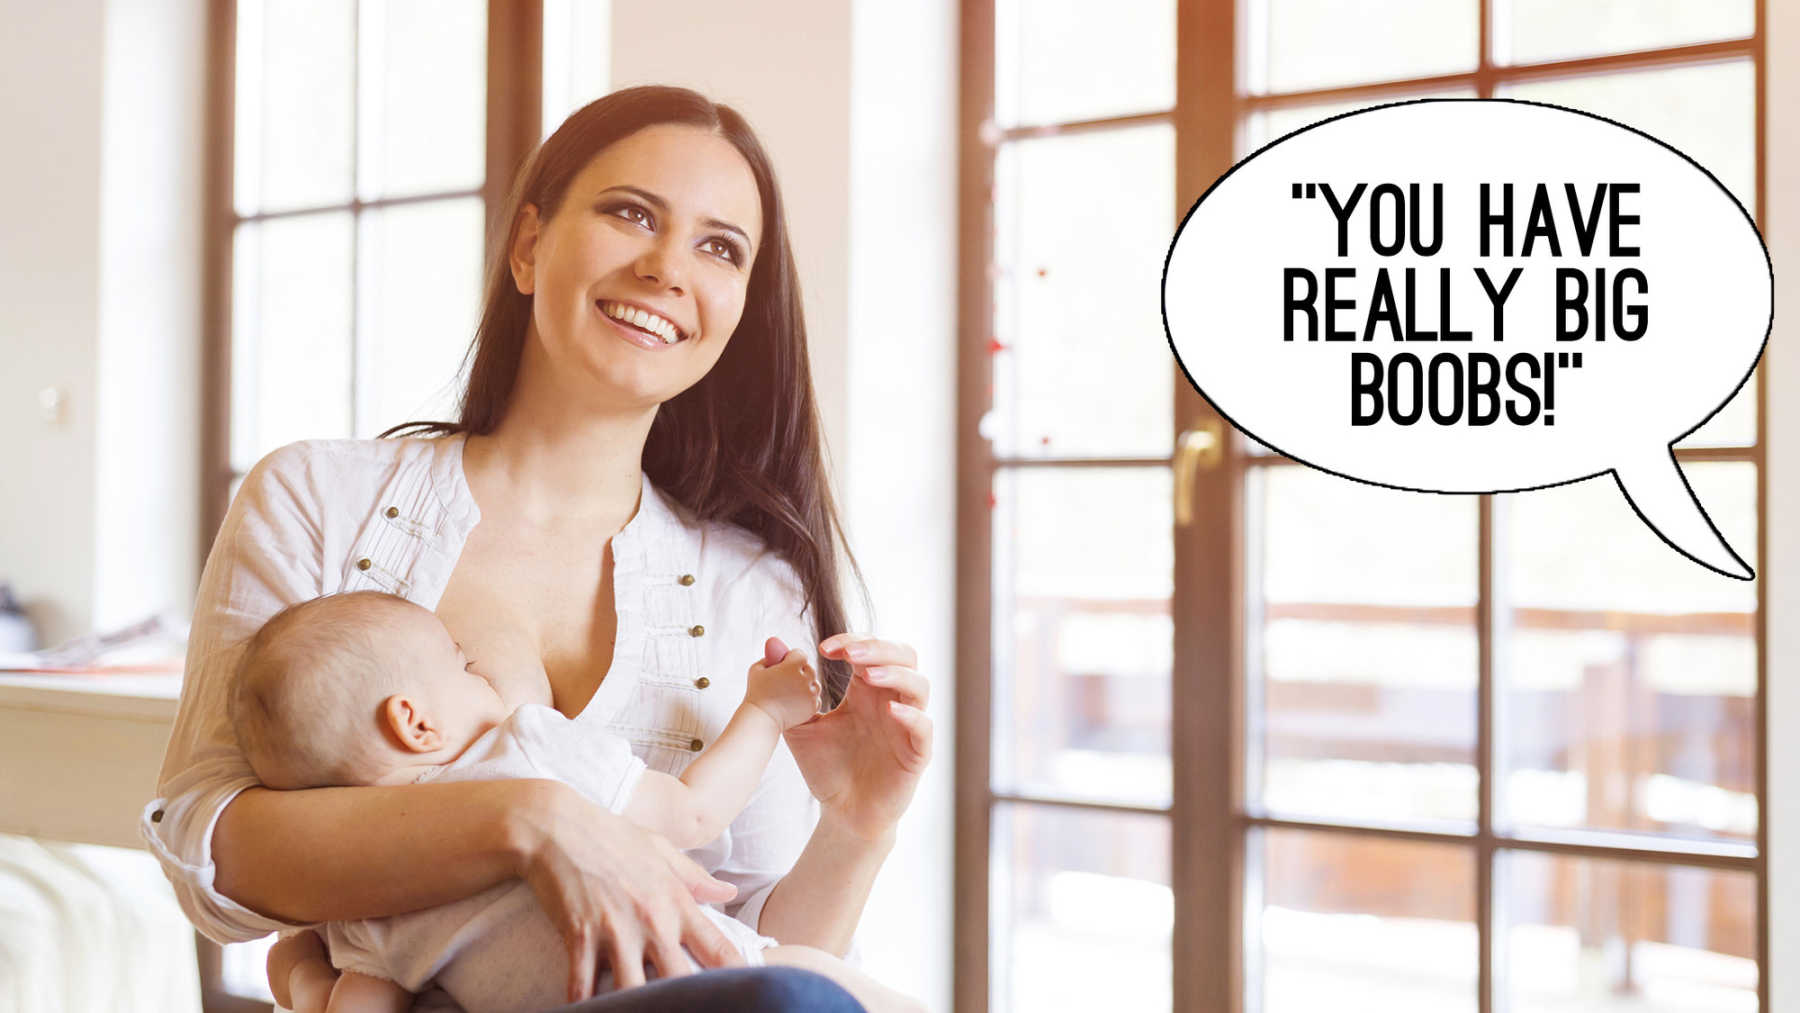 15 Most Obnoxious Things People Have Said to Breastfeeding Moms